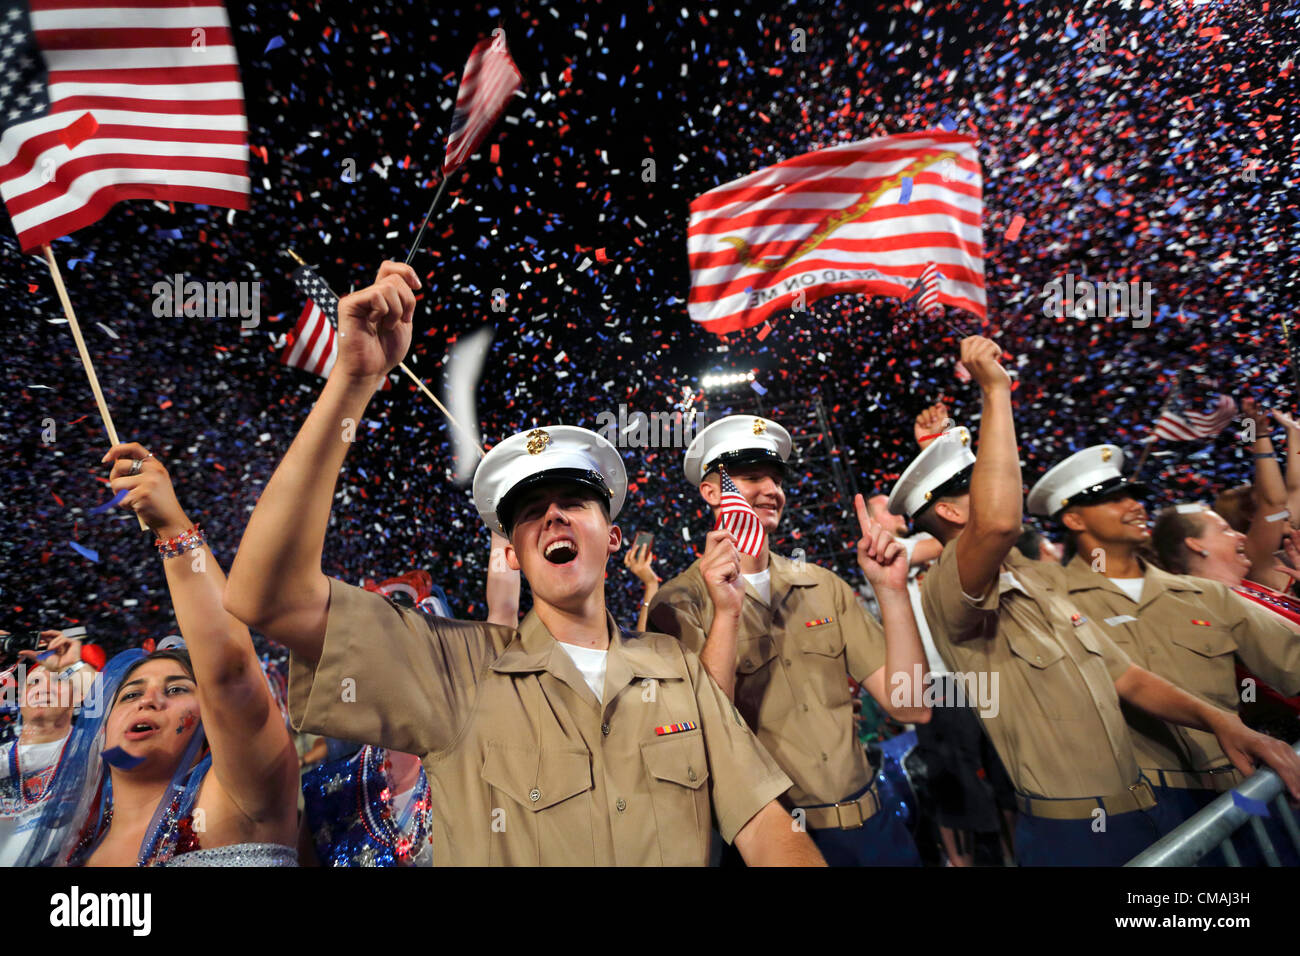 US Marines celebrate during the annual  Independence Day Boston Pops Orchestra concert at the Hatch Shell in Boston, Massachusetts, Wednesday, July 4, 2012. Stock Photo